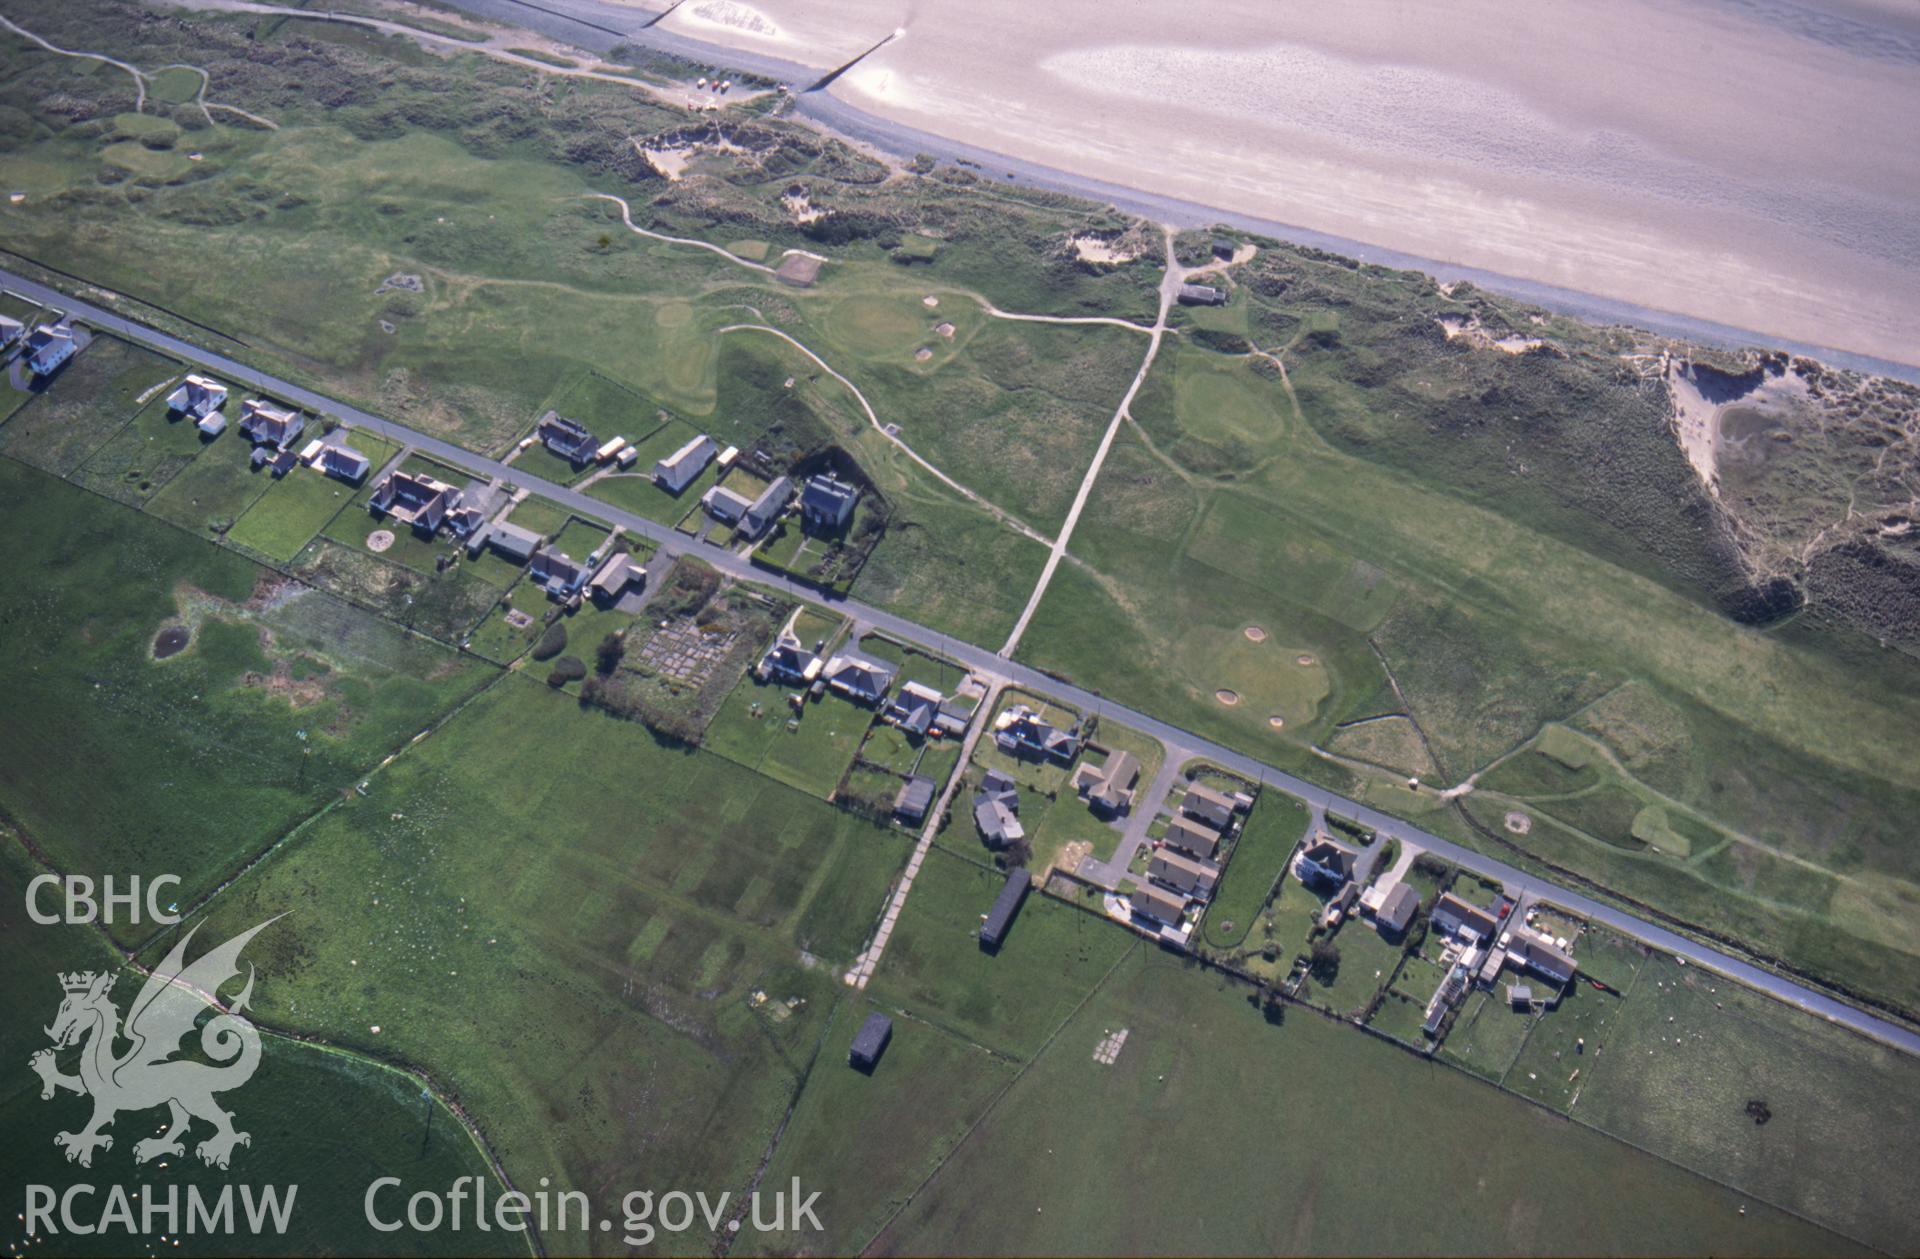 RCAHMW colour slide oblique aerial photograph of old barrack blocks at Ynys Tachwedd, Borth, taken on 29/04/1999 by Toby Driver